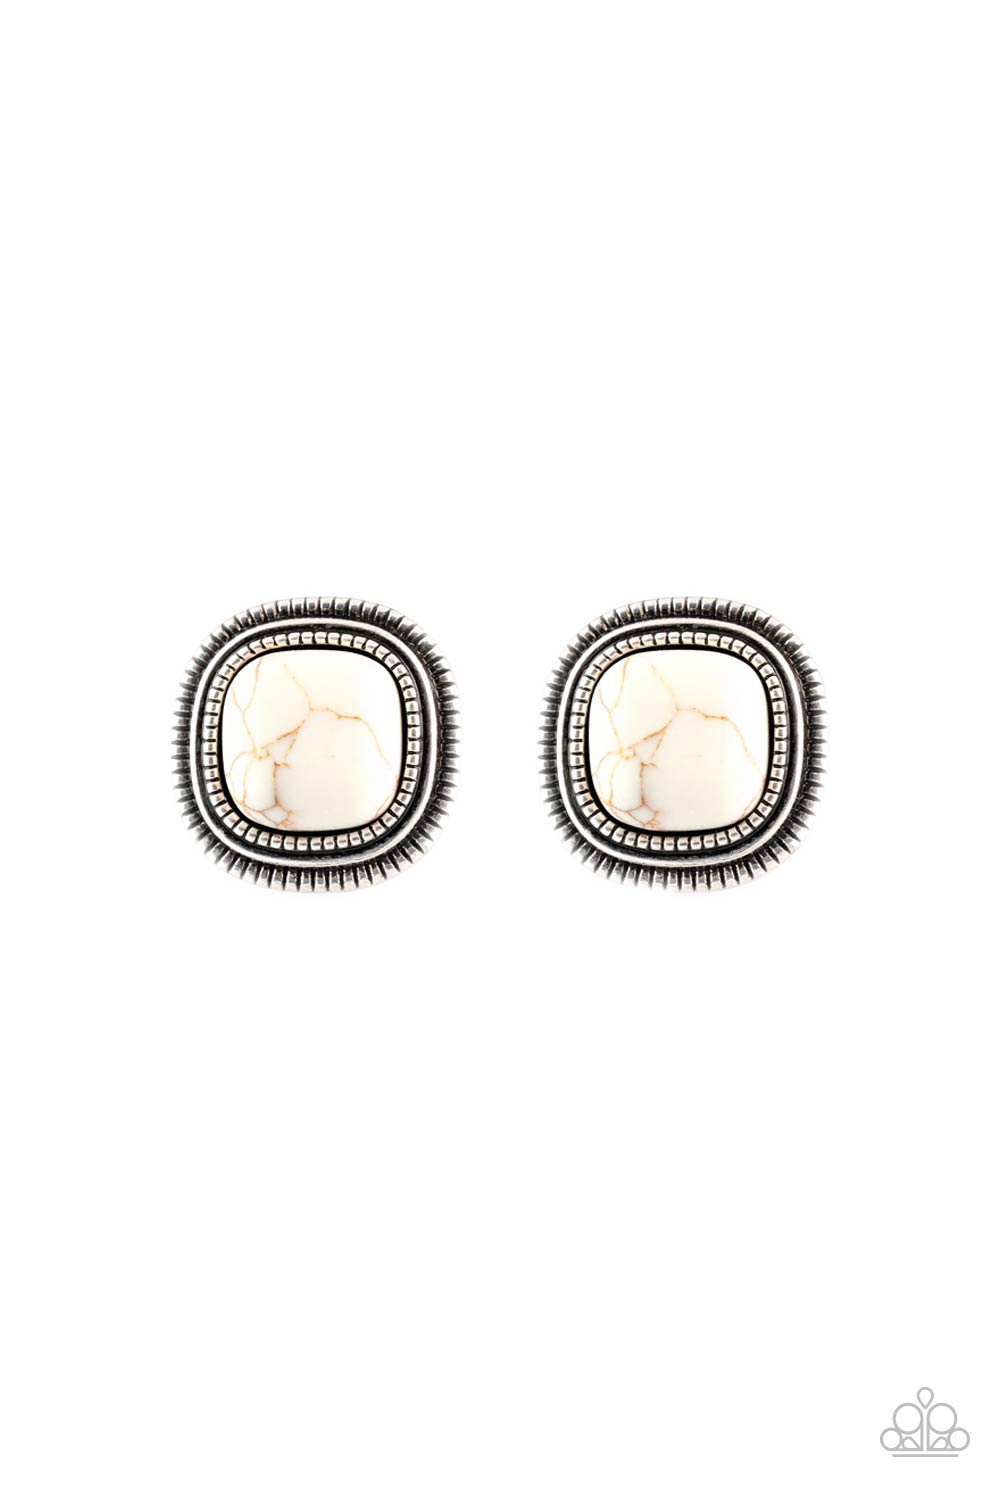 Chiseled into a tranquil square, a refreshing white stone is pressed into a studded silver frame for a seasonal look. Earring attaches to a standard post fitting.